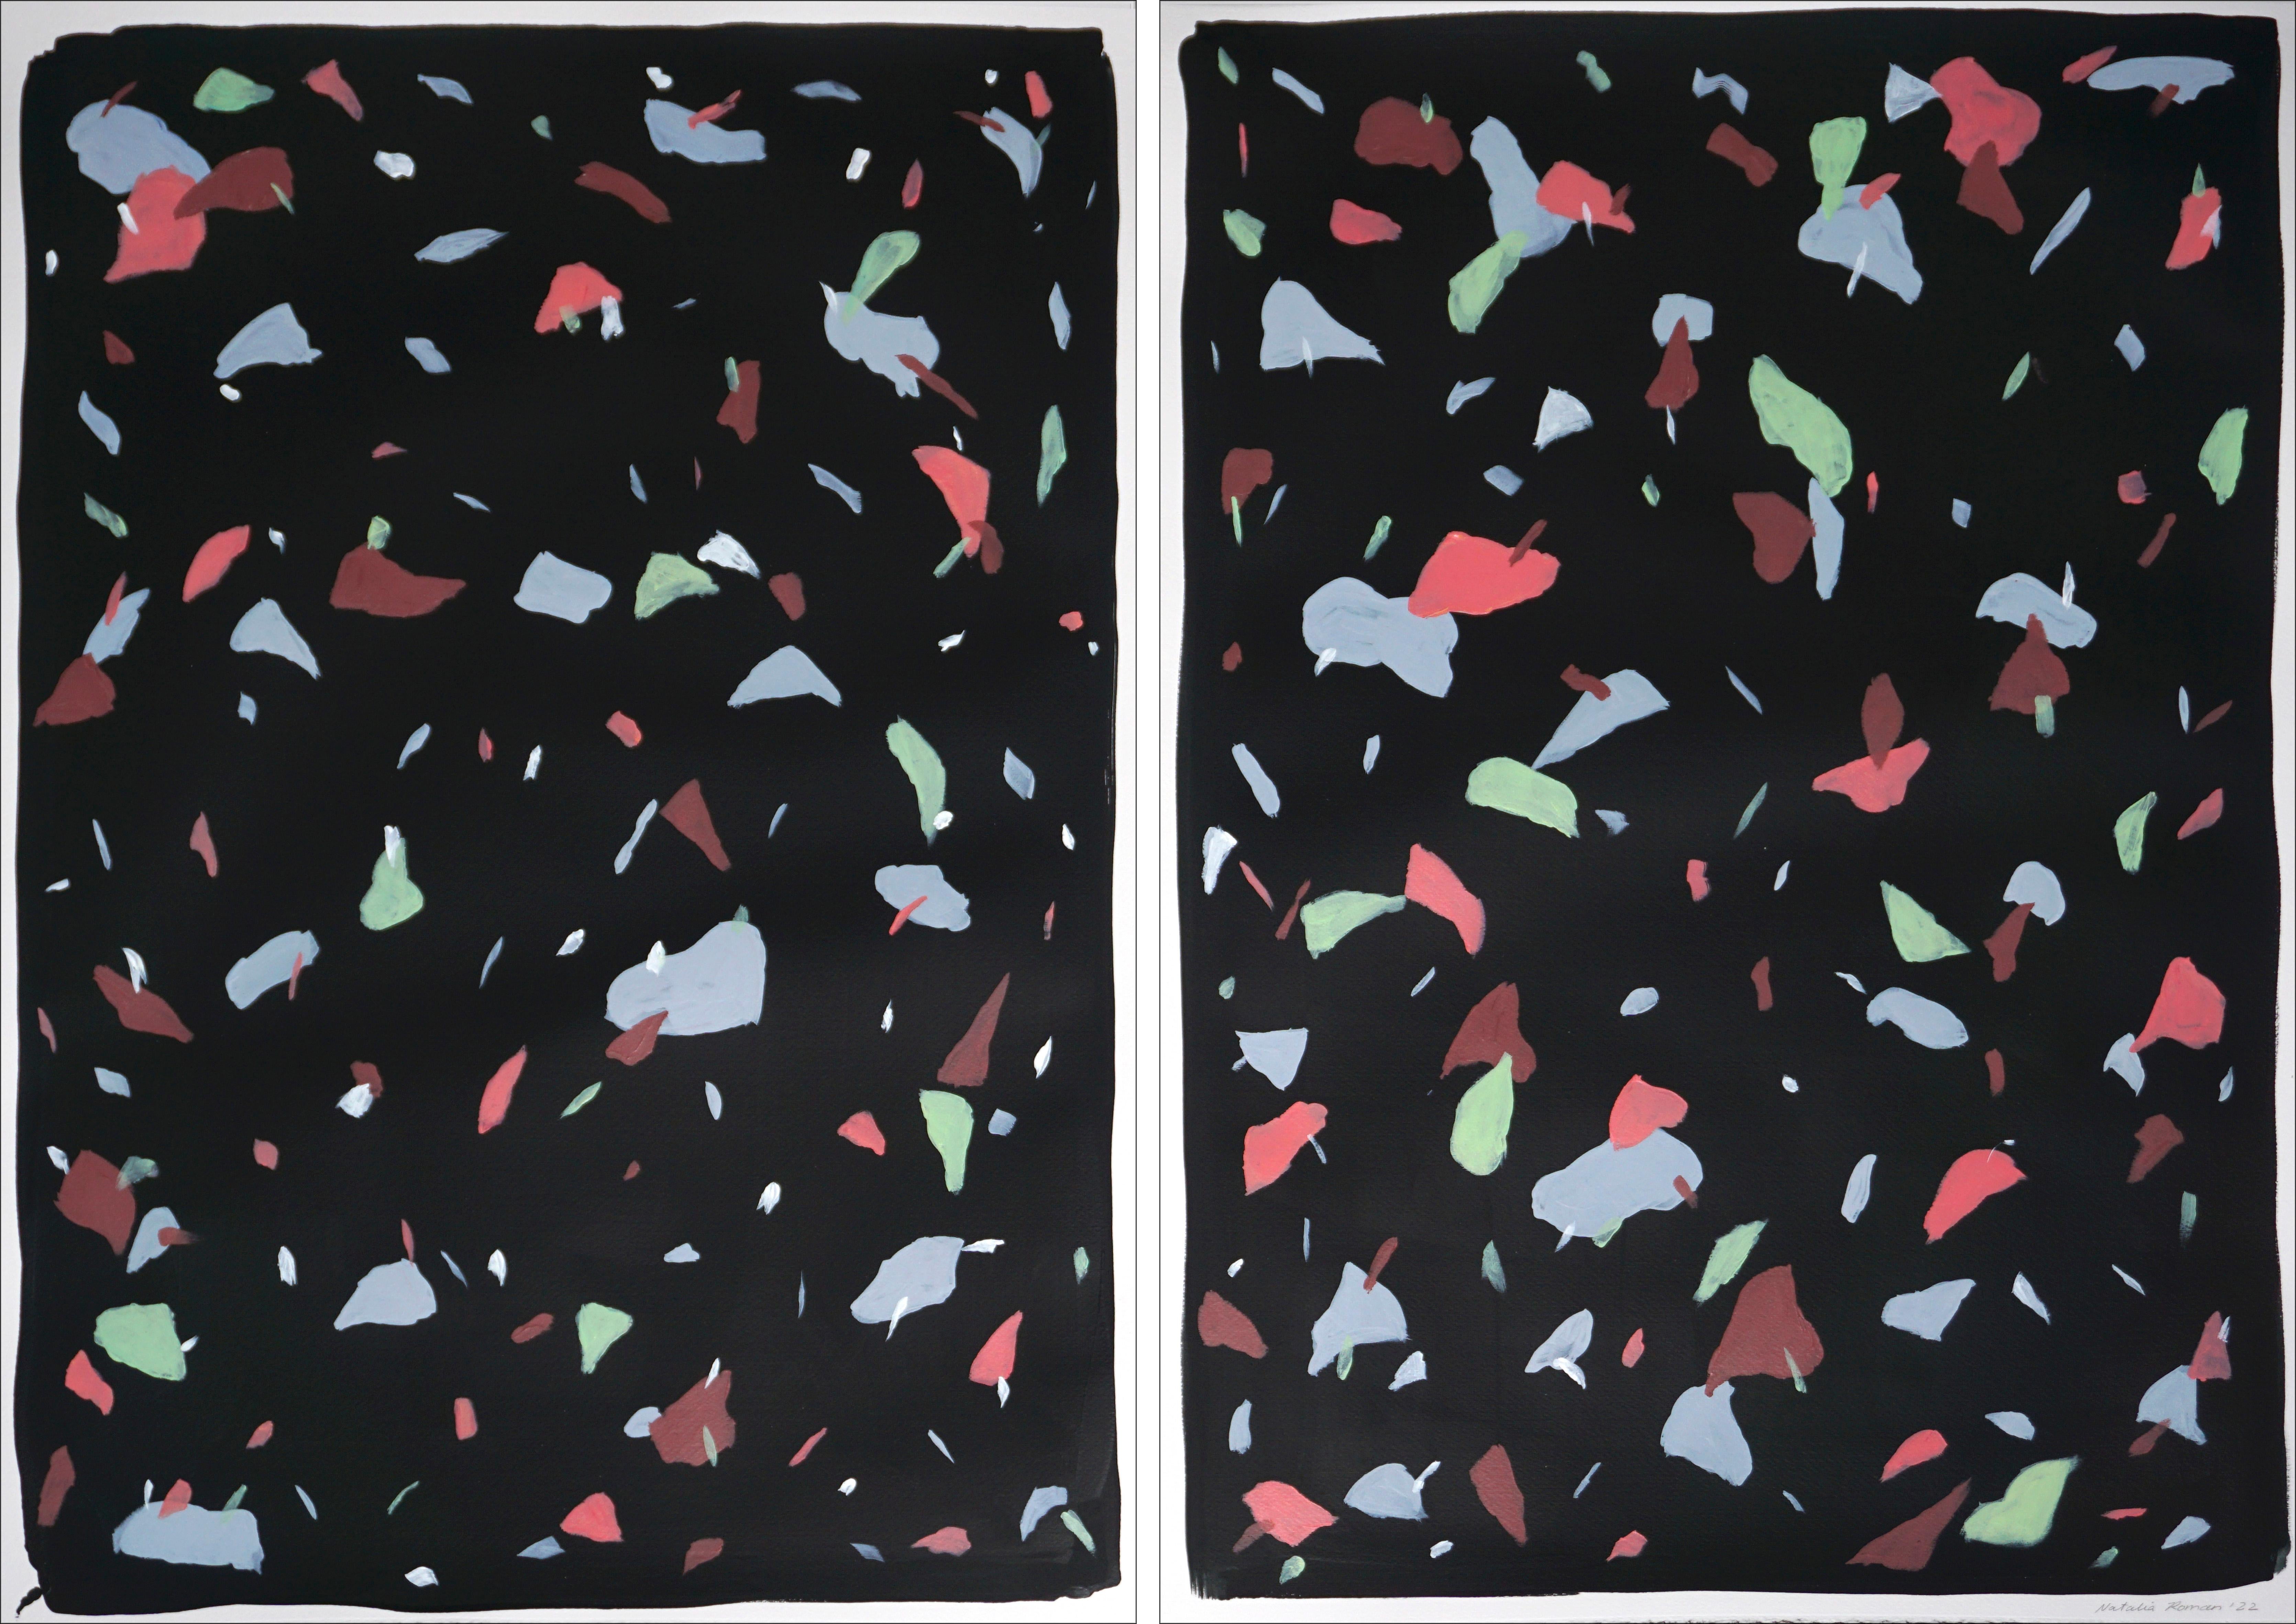 Black Terrazzo Confetti, Abstract Shapes Diptych, Pink and Blue Metal Tones 2022